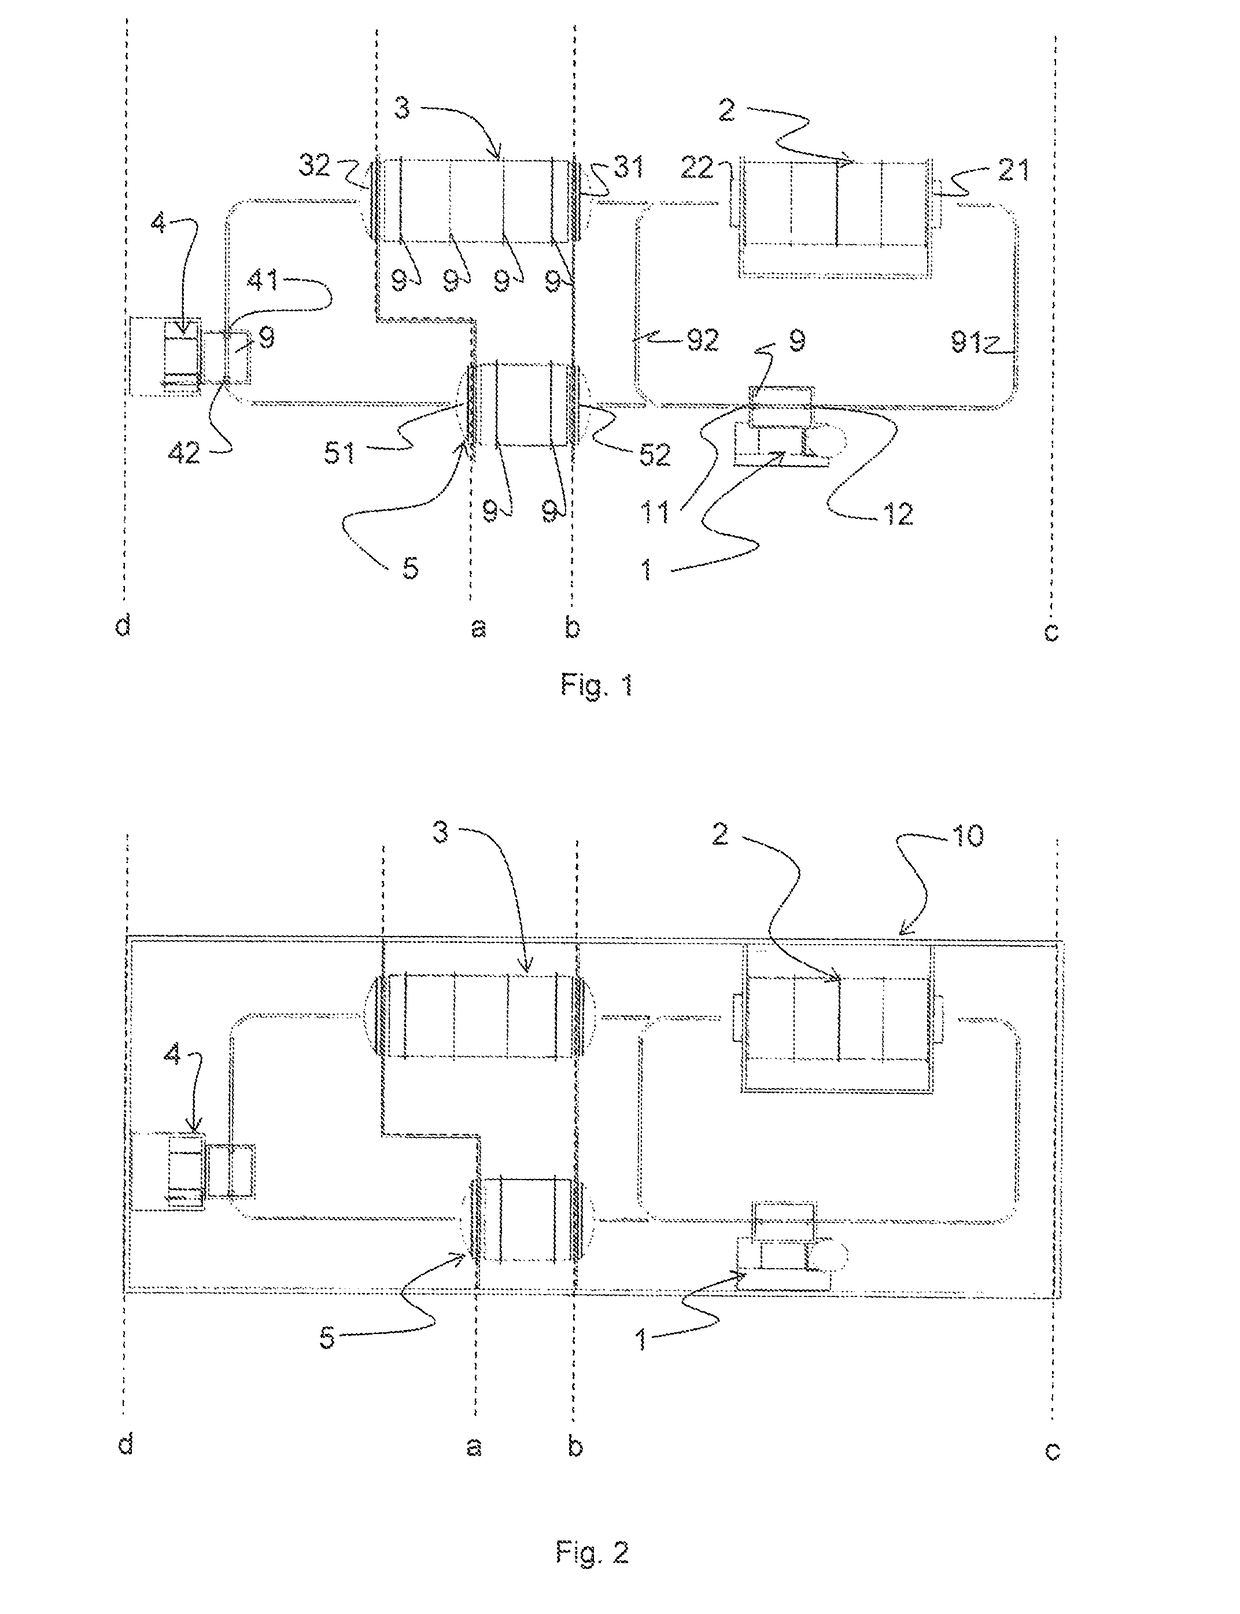 Method of providing inline sterile freeze drying of a product in trays accommodated in a trolley, system for carrying out the method, and use of the method